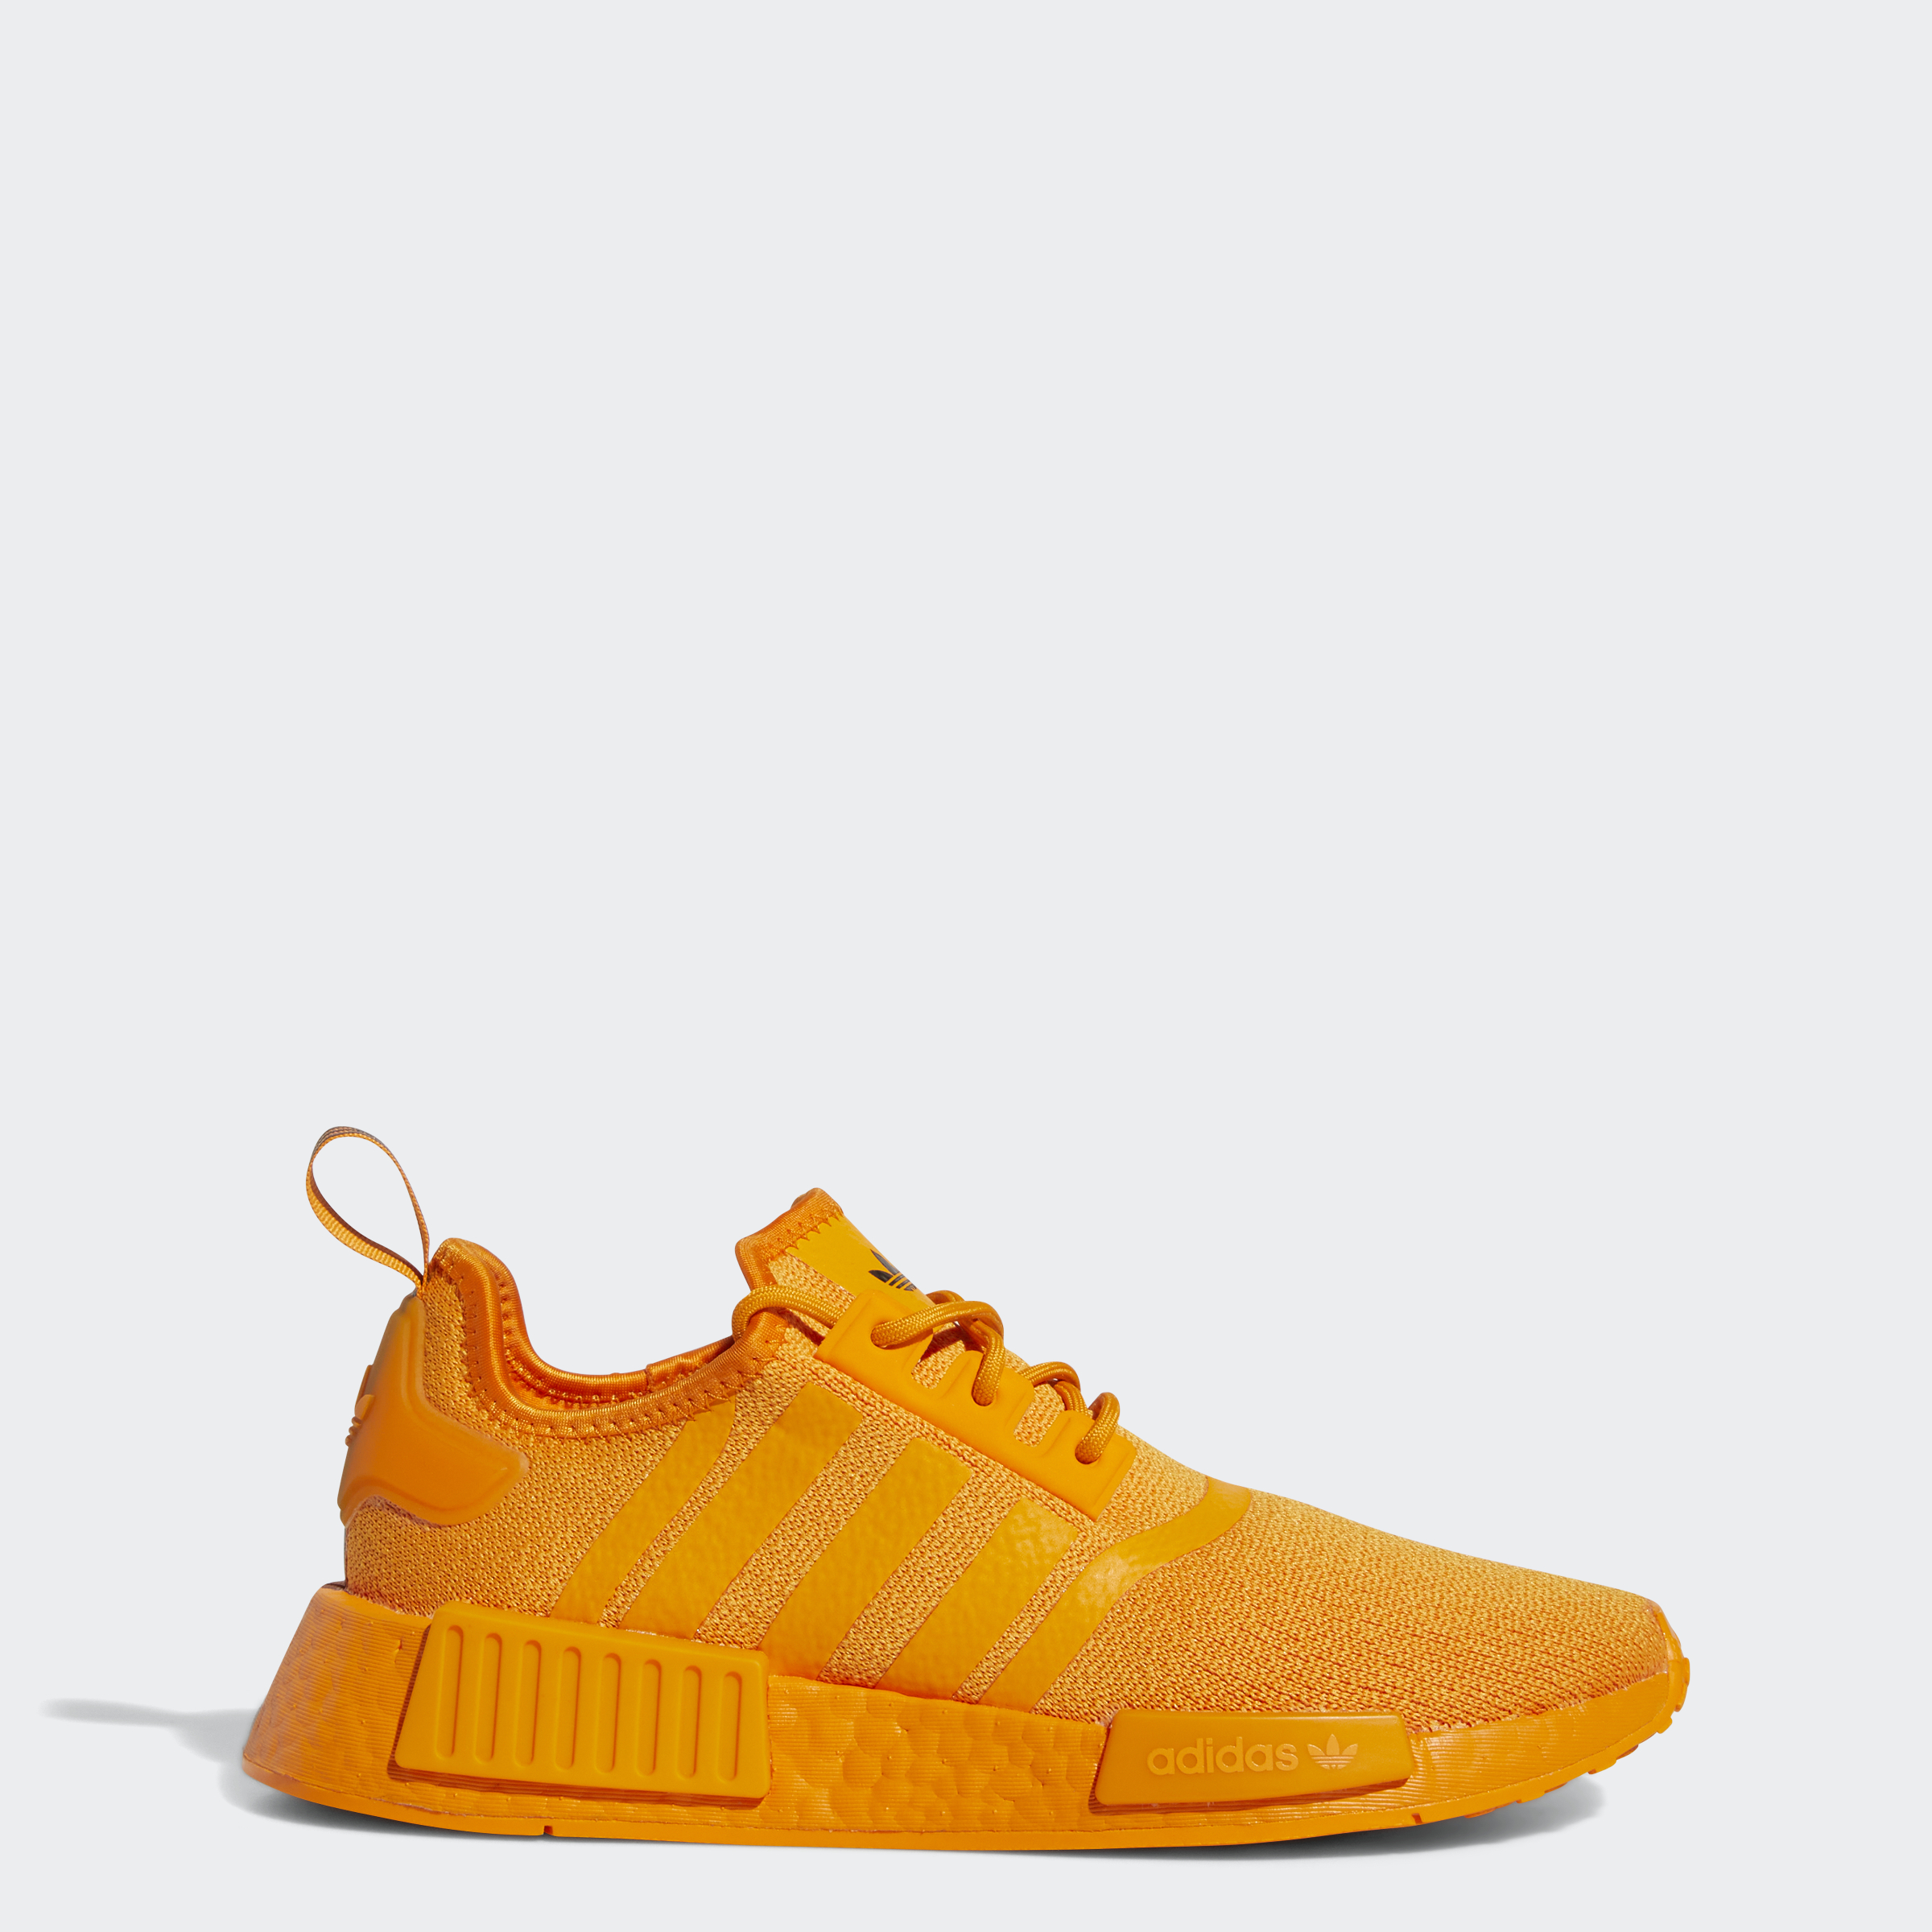 adidas Women's NMD_R1 Shoes (Bright Orange, limited sizes) $28 + Free Shipping